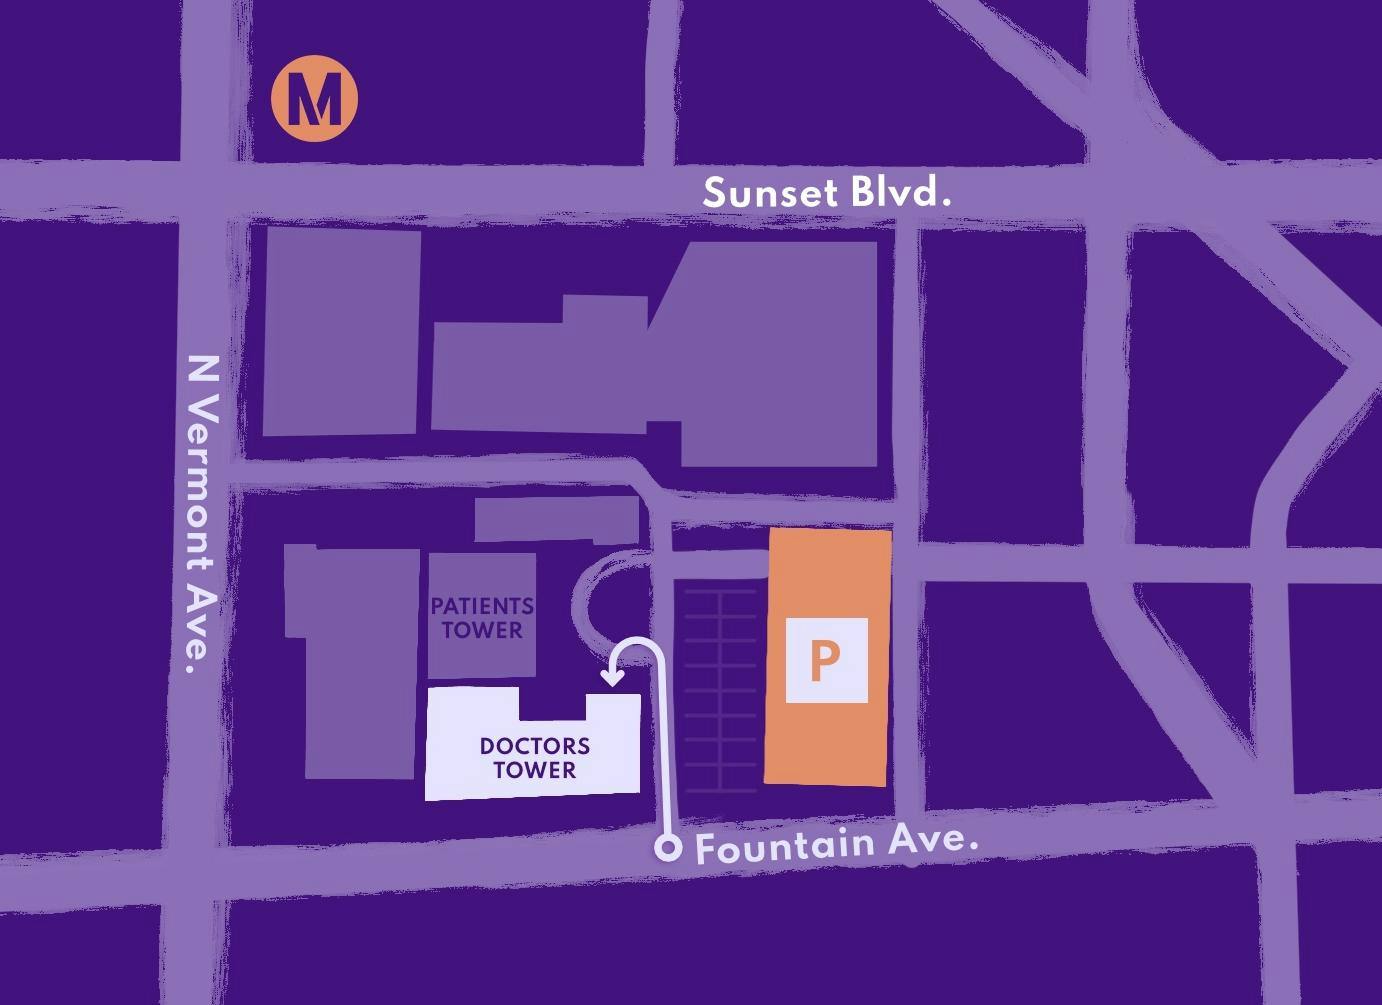 Map of the office location. To find our office, enter the hospital campus from Fountain Ave. Parking lot will be to your right.  Main entrance to Doctors’ Tower is on your left.